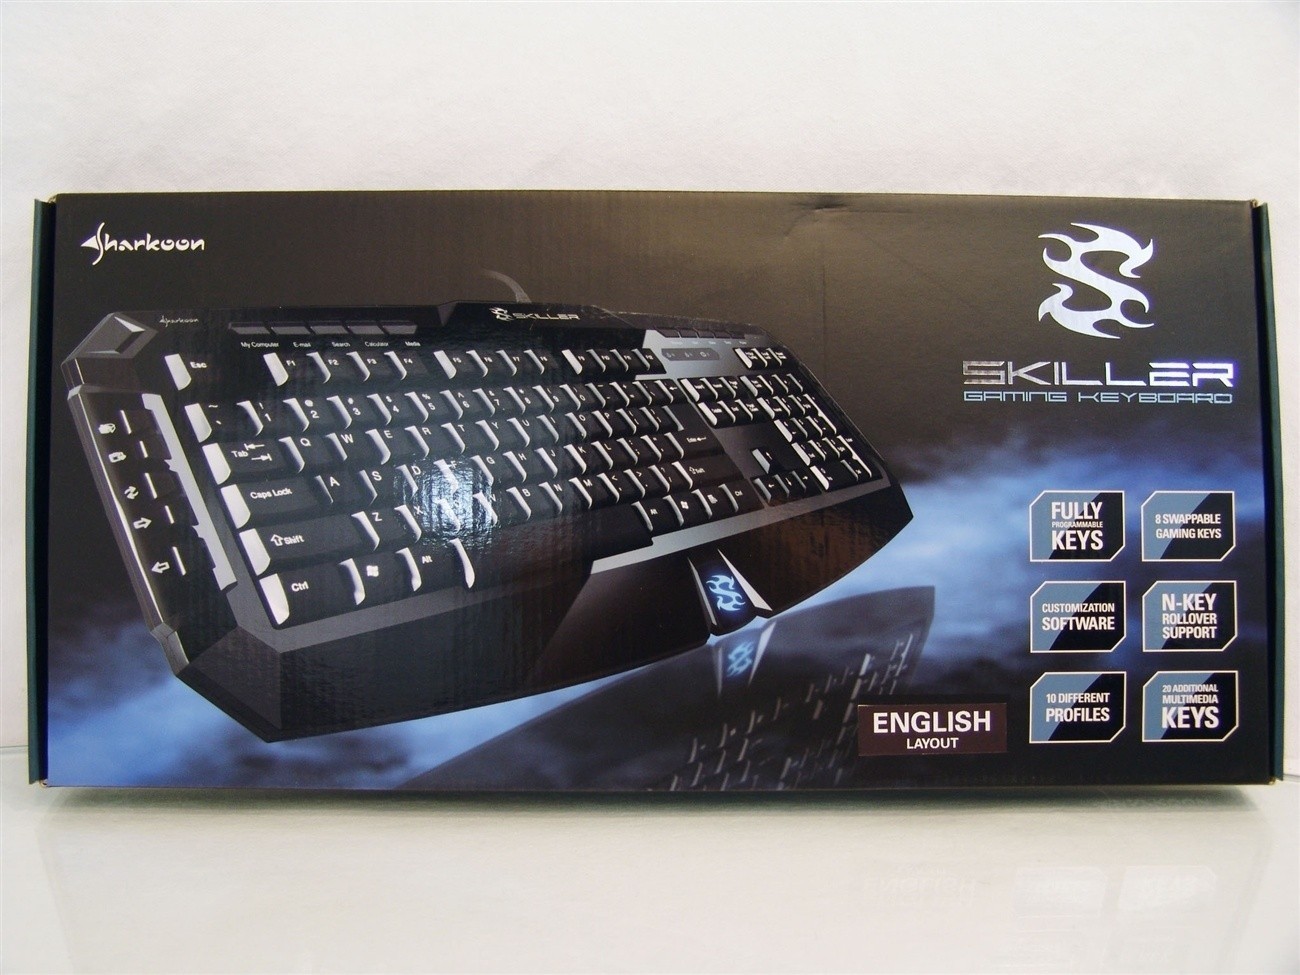 Gaming Keyboard And Mouse Amazon